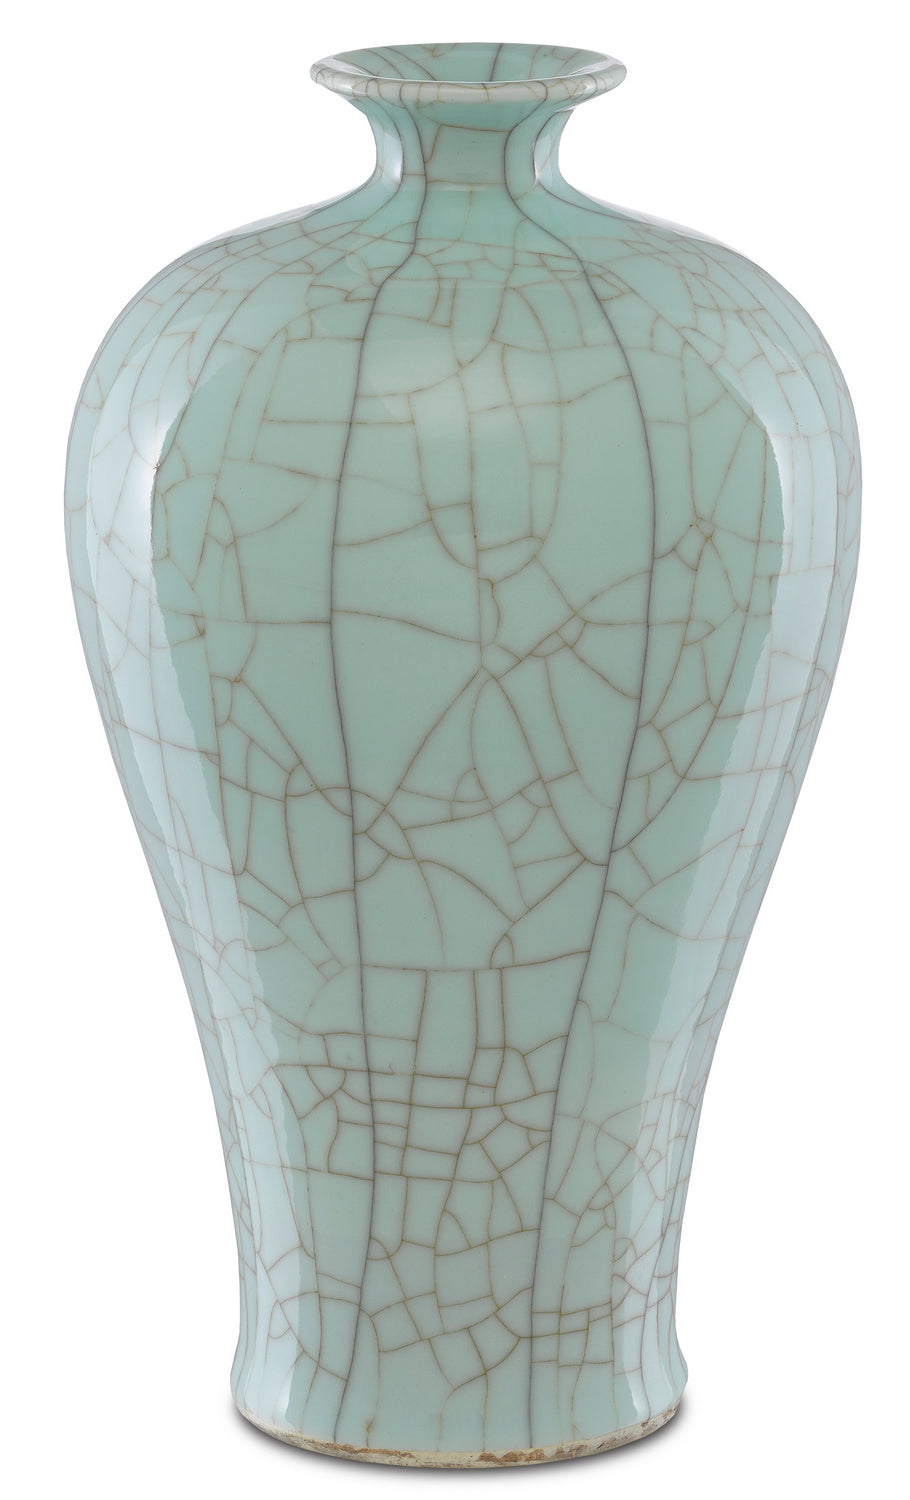 Vase from the Maiping collection in Celadon Crackle finish